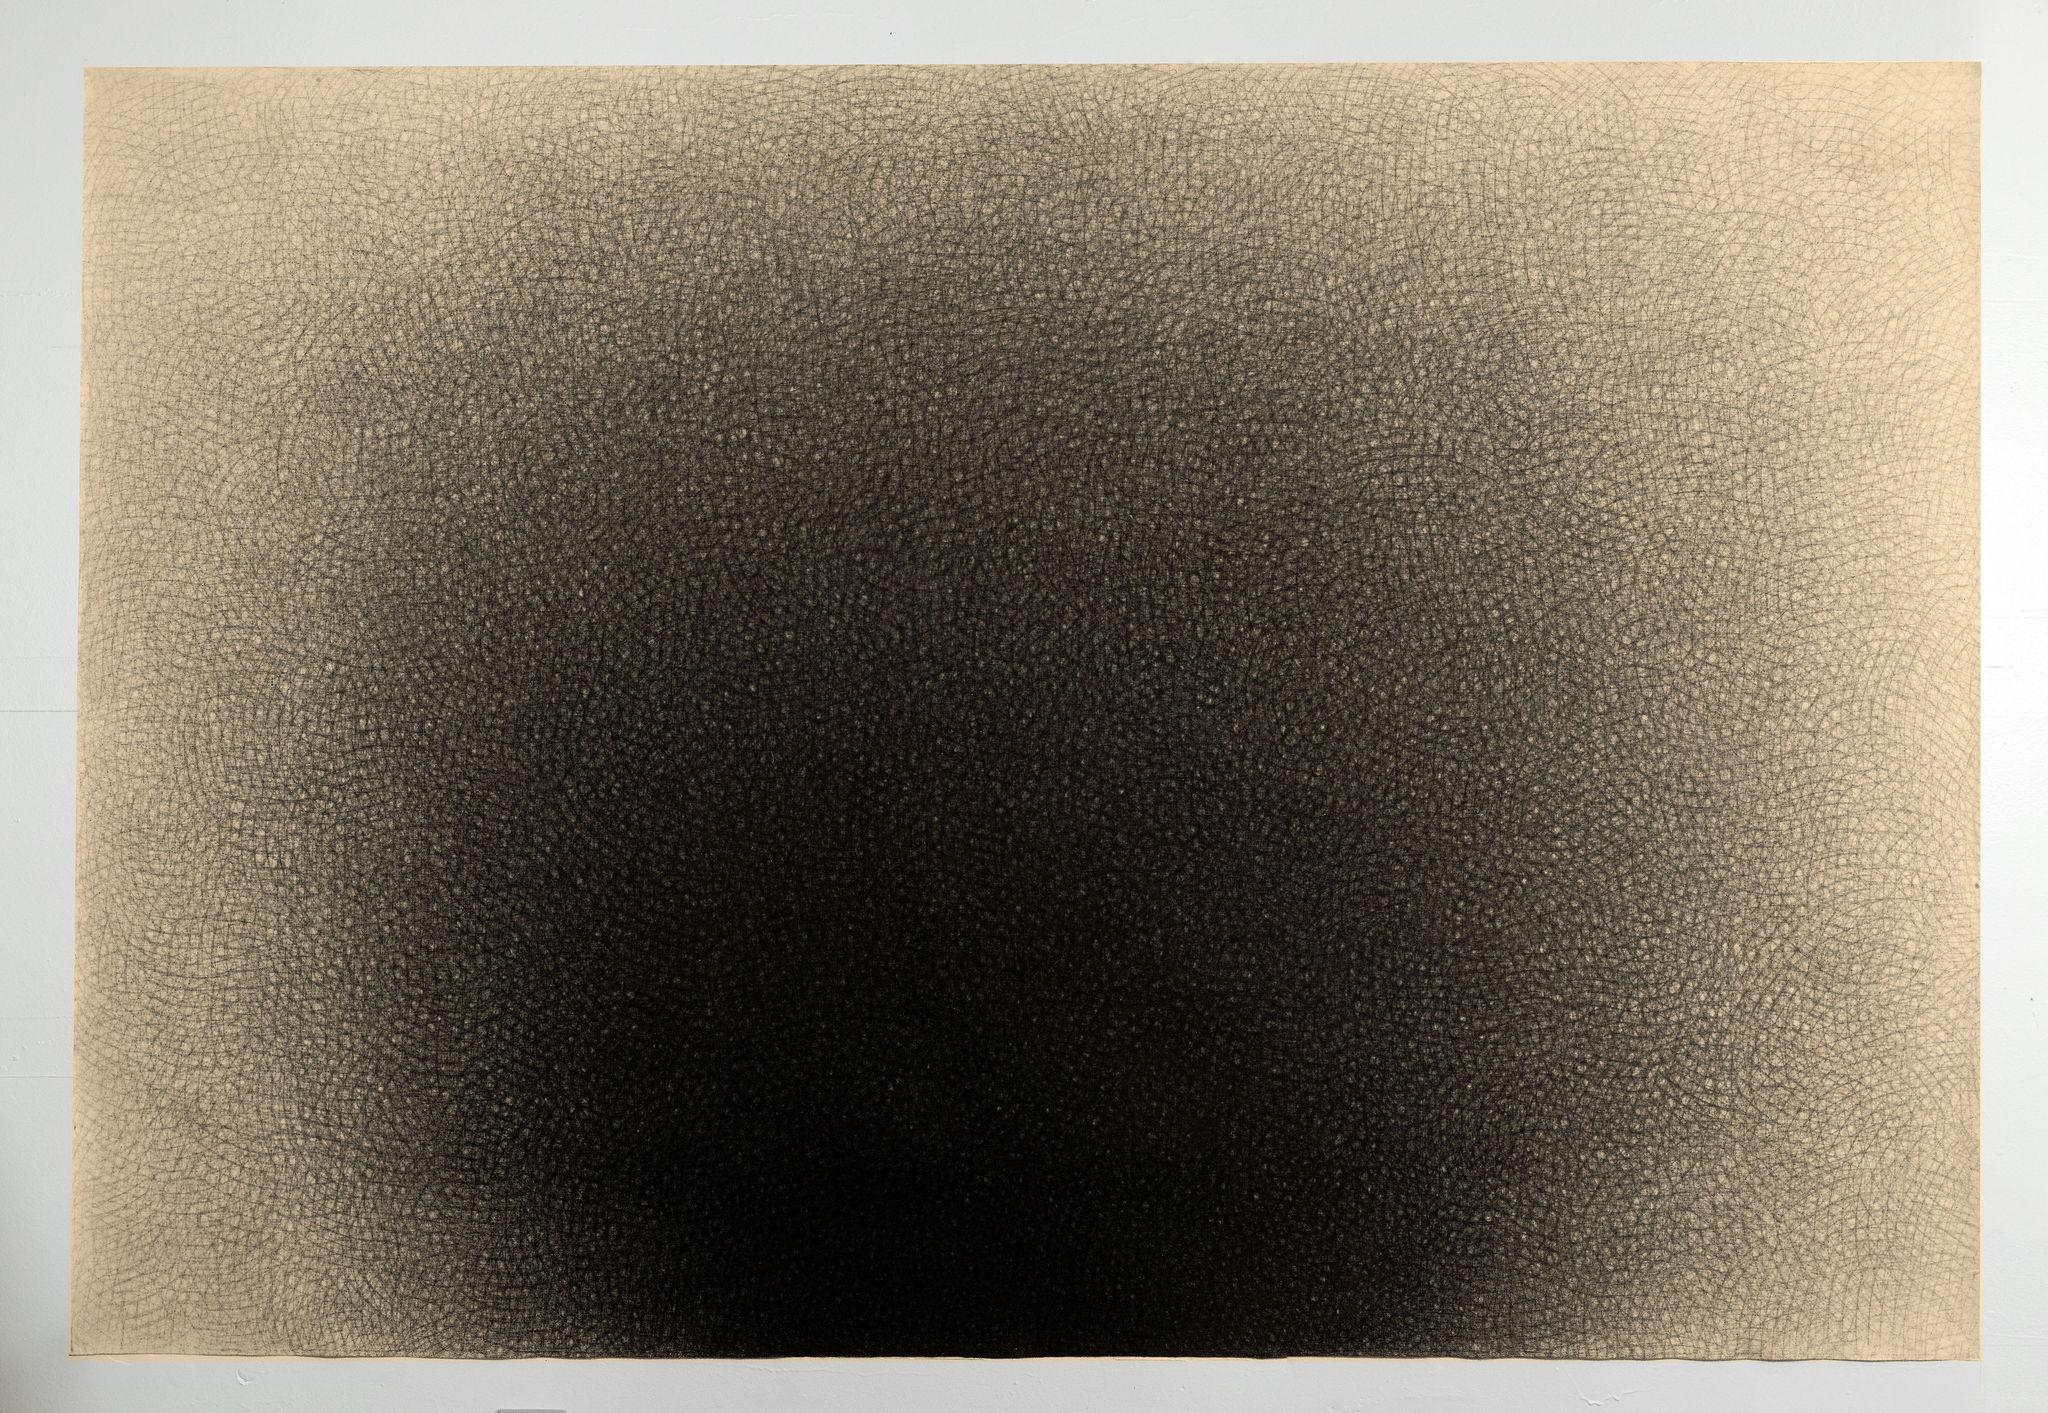 Jack Scott
"Slow Blur"
1976
Charcoal on unprimed canvas sprayed with custom fixative
89.25"x60.25" unstretched
Signed, titled and dated in pencil on reverse

This canvas is a testament to the artist's meticulous craftsmanship and creative vision.